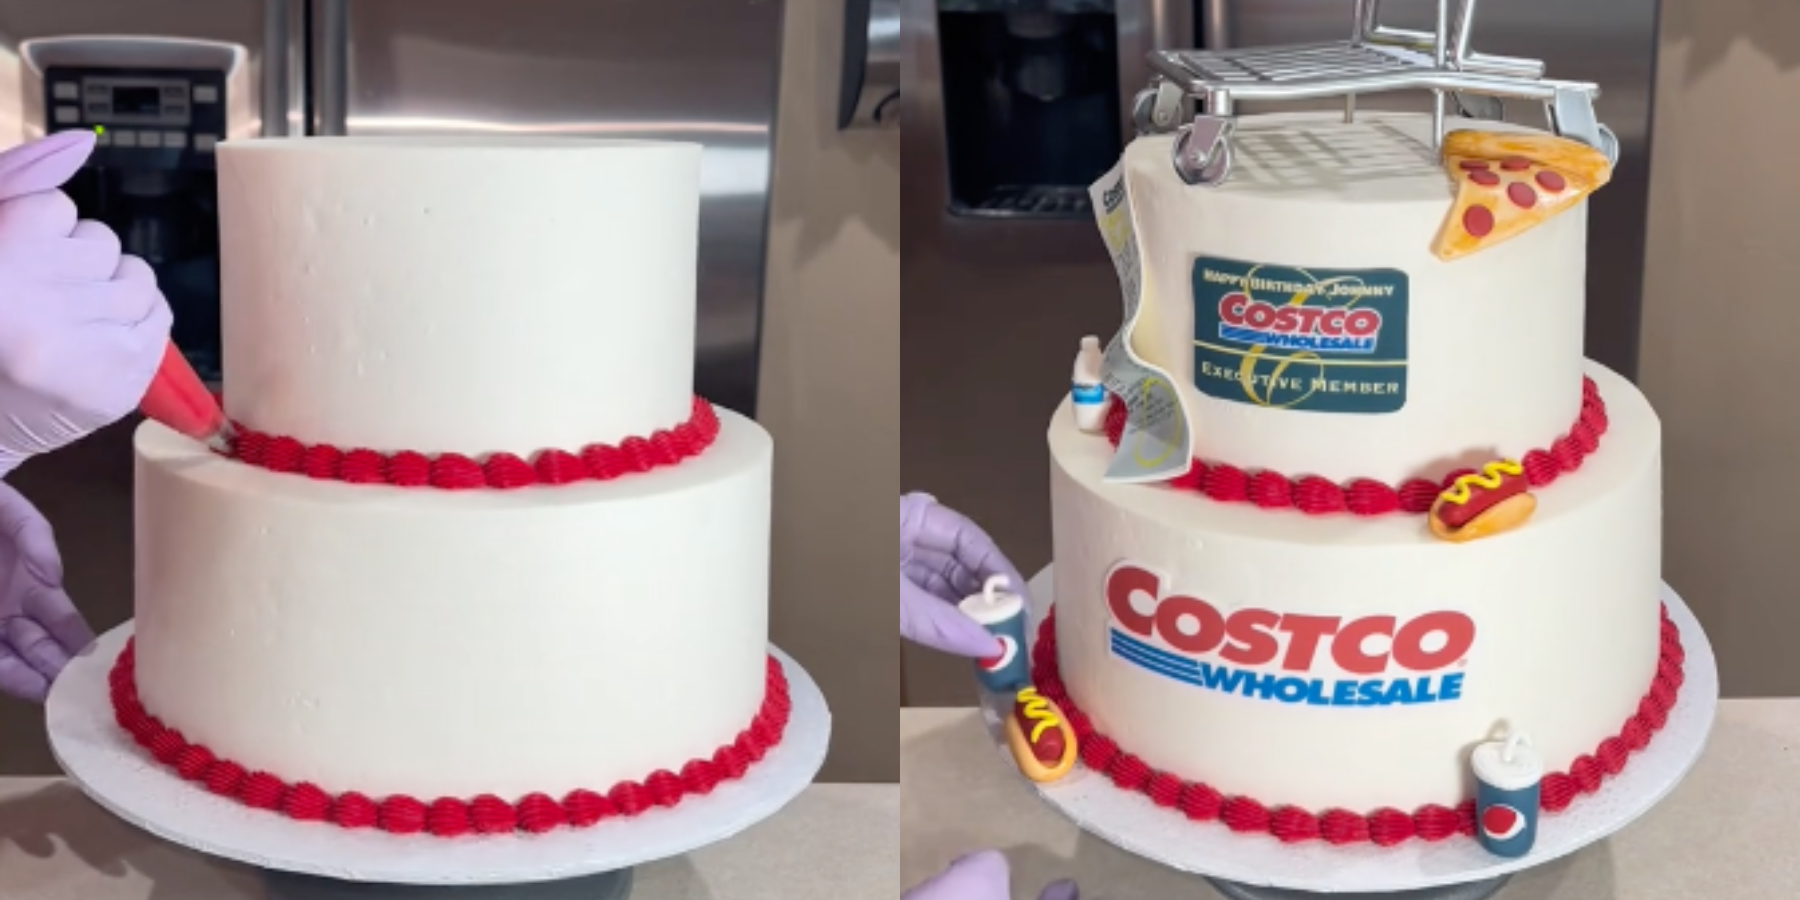 A Baker Was Asked To Make A Costco-Themed Birthday Cake And Absolutely Nailed It